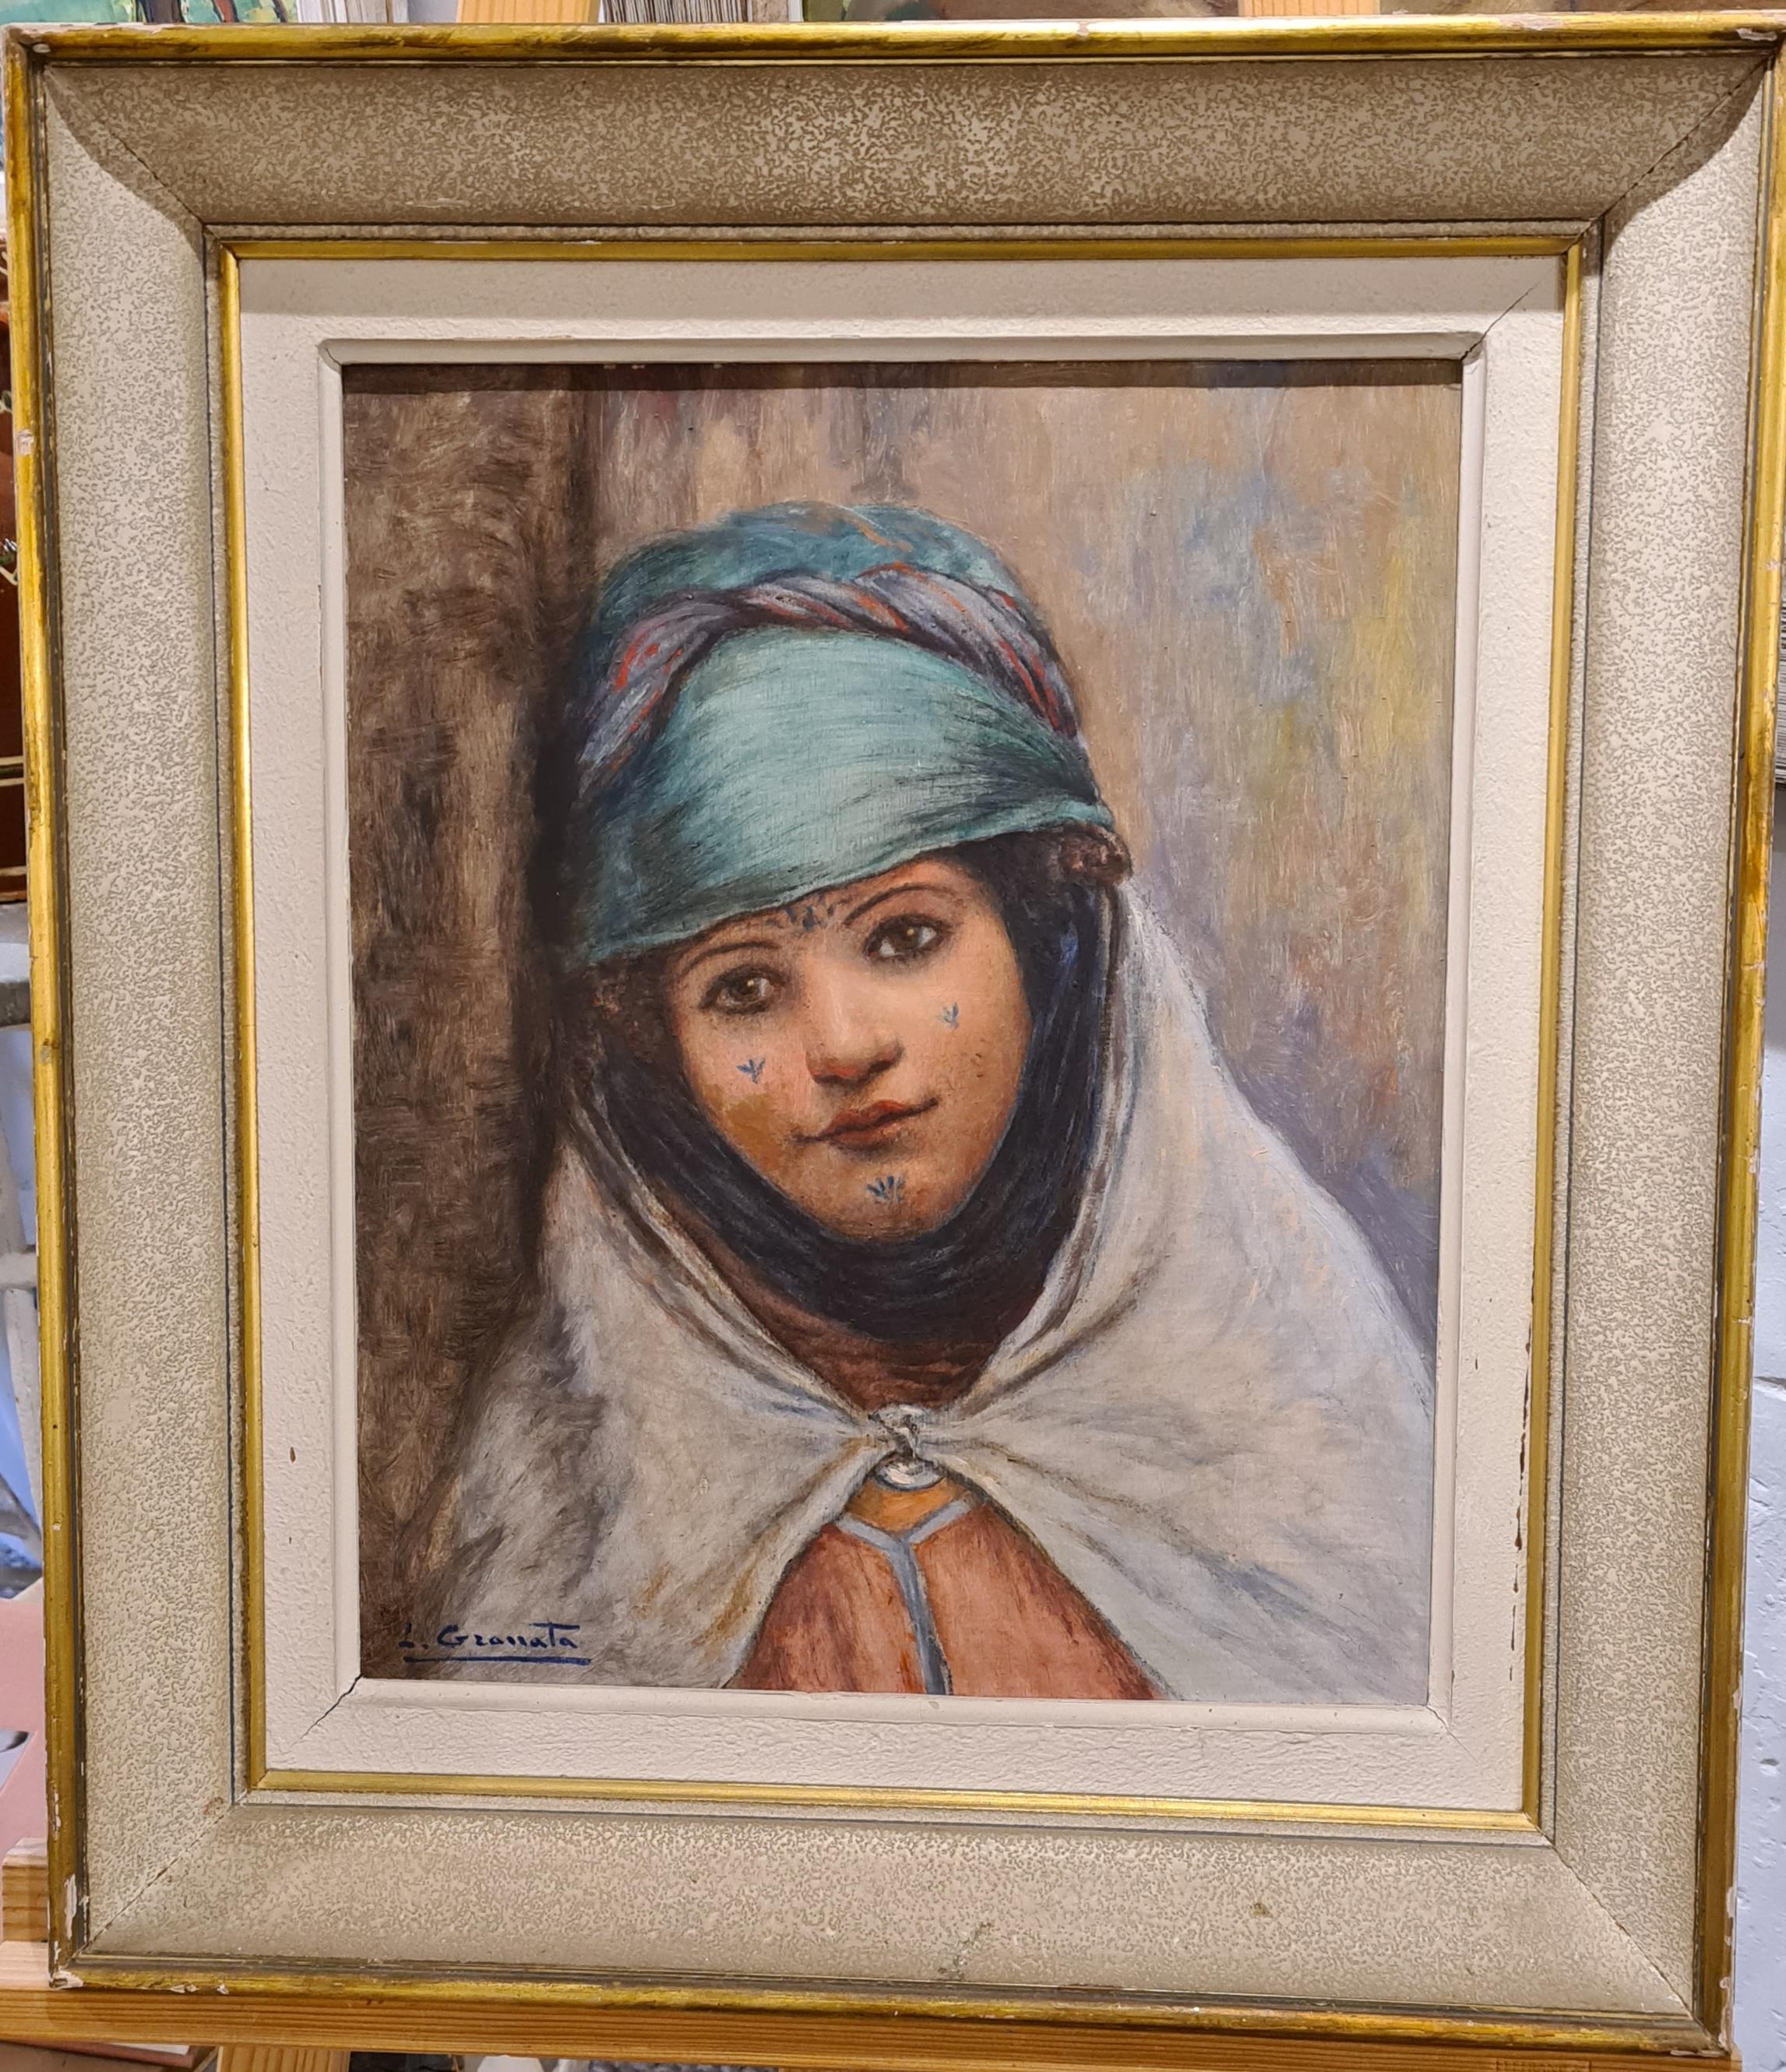 Mauresque, Bou Saada, Orientalist portrait of a young girl in costume. - Painting by Louis Granata